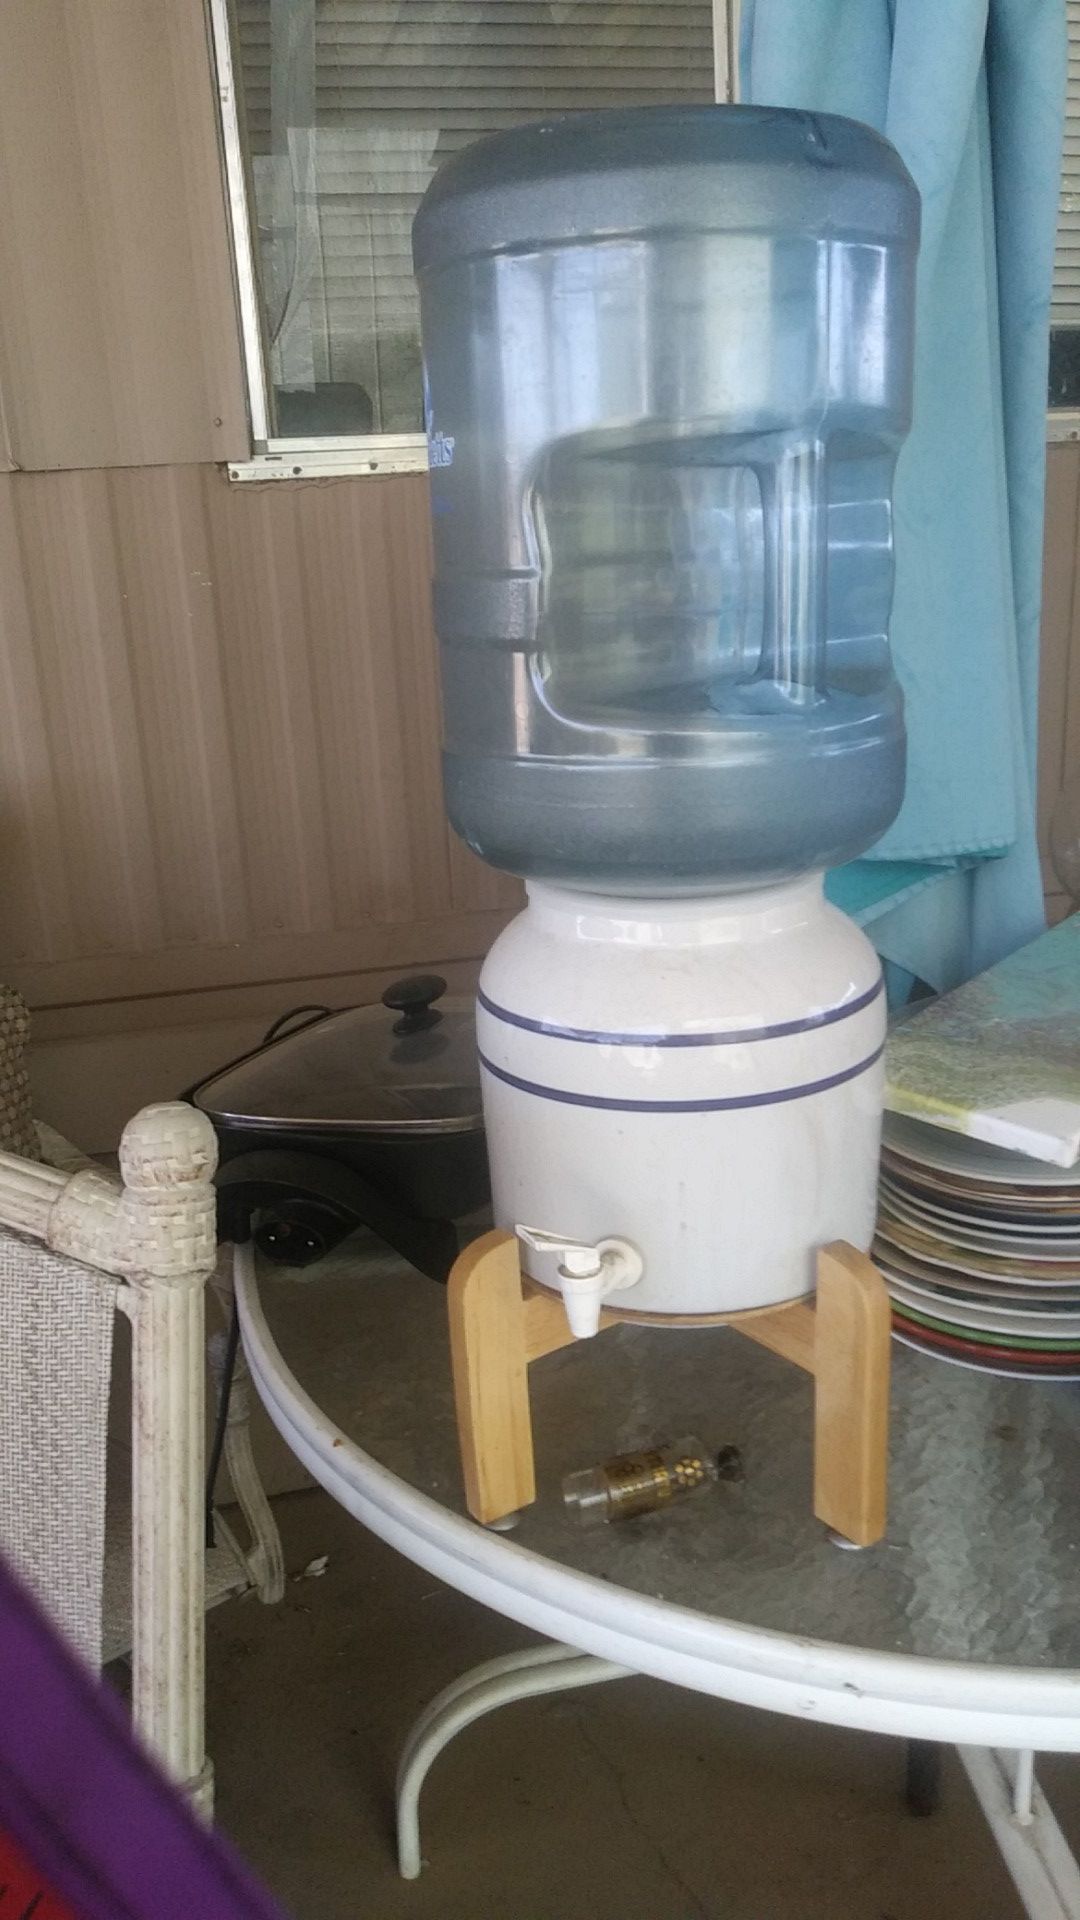 Ceramic water cooler with two Jugs to go with it 5-gallon